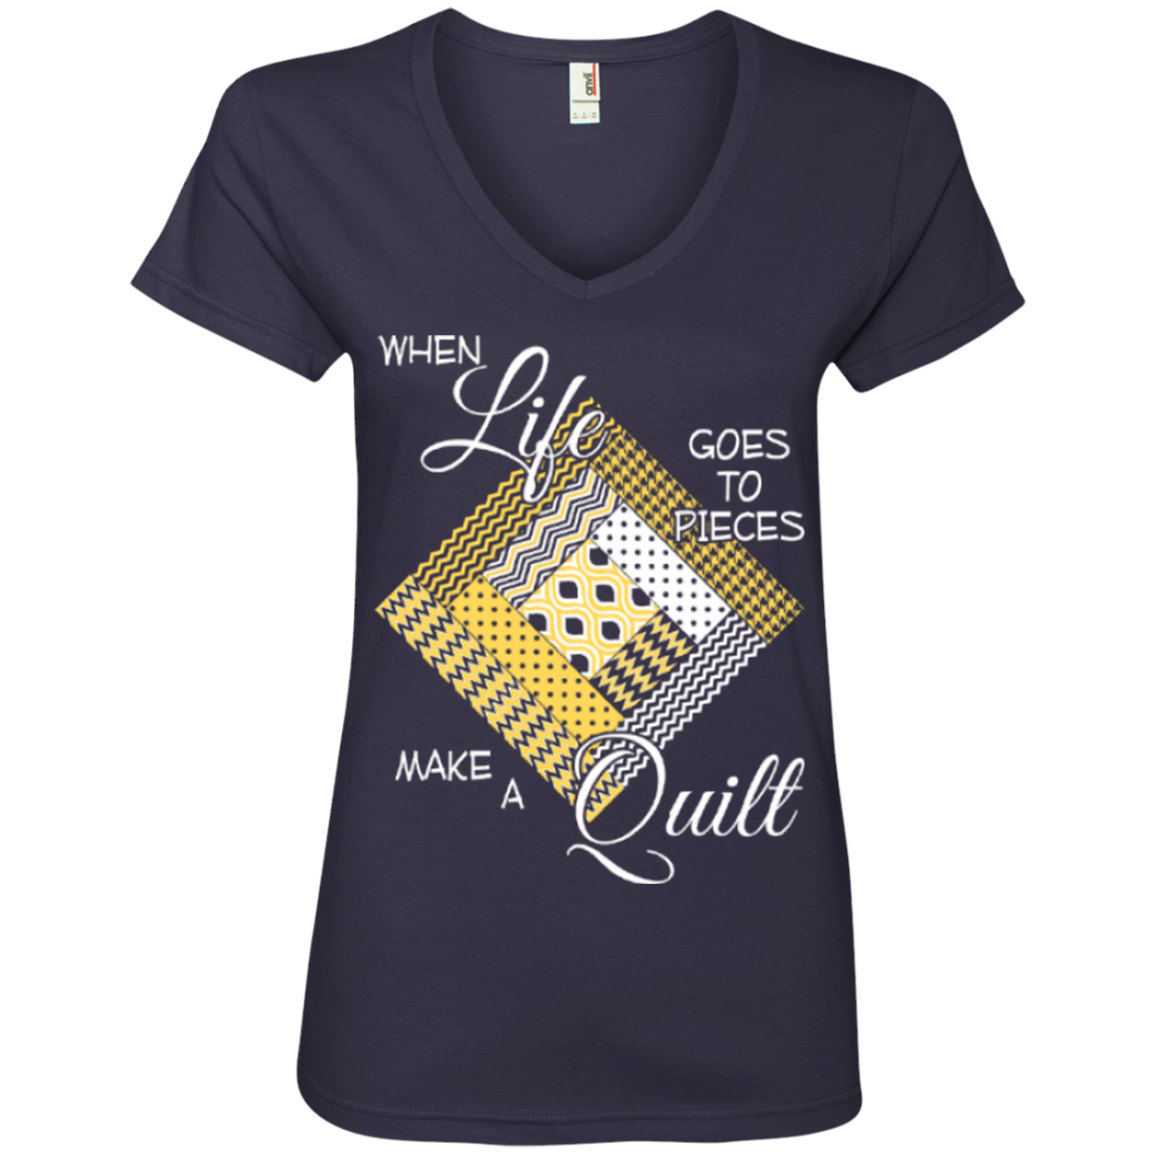 Make a Quilt (yellow) Ladies V-Neck Tee - Crafter4Life - 1